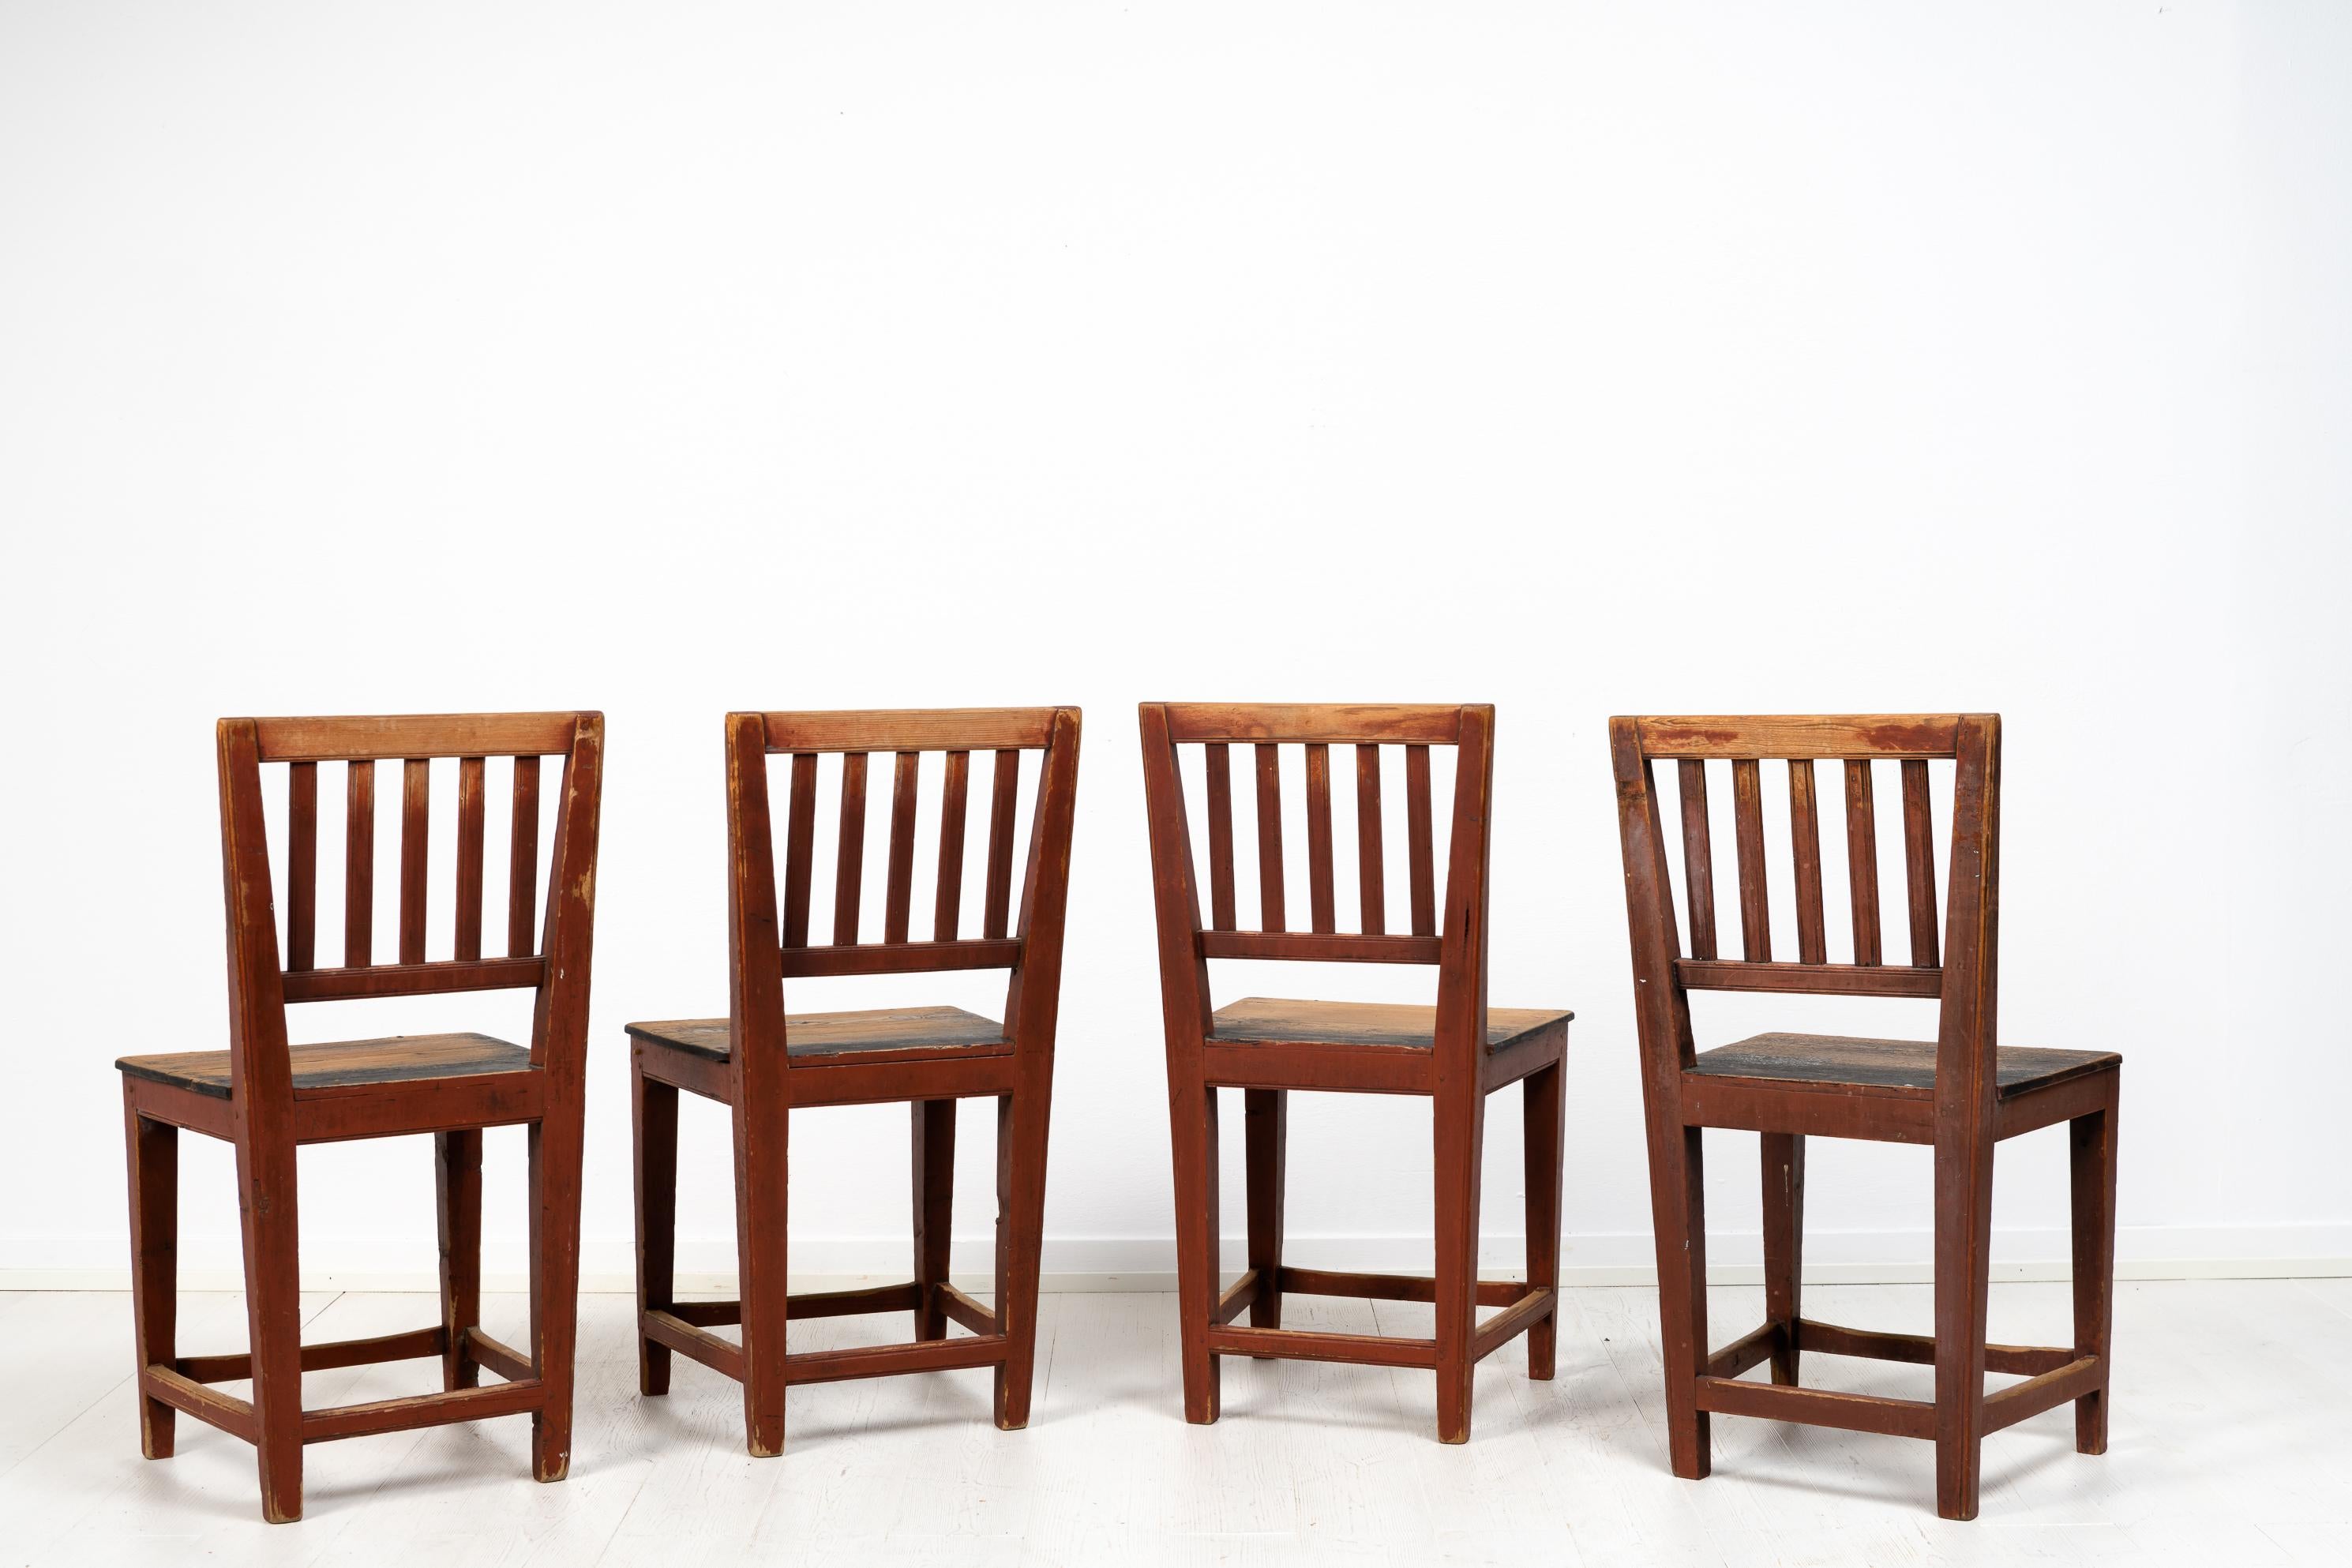 Hand-Crafted Set of 4 Swedish Folk Art Dining Room Chairs